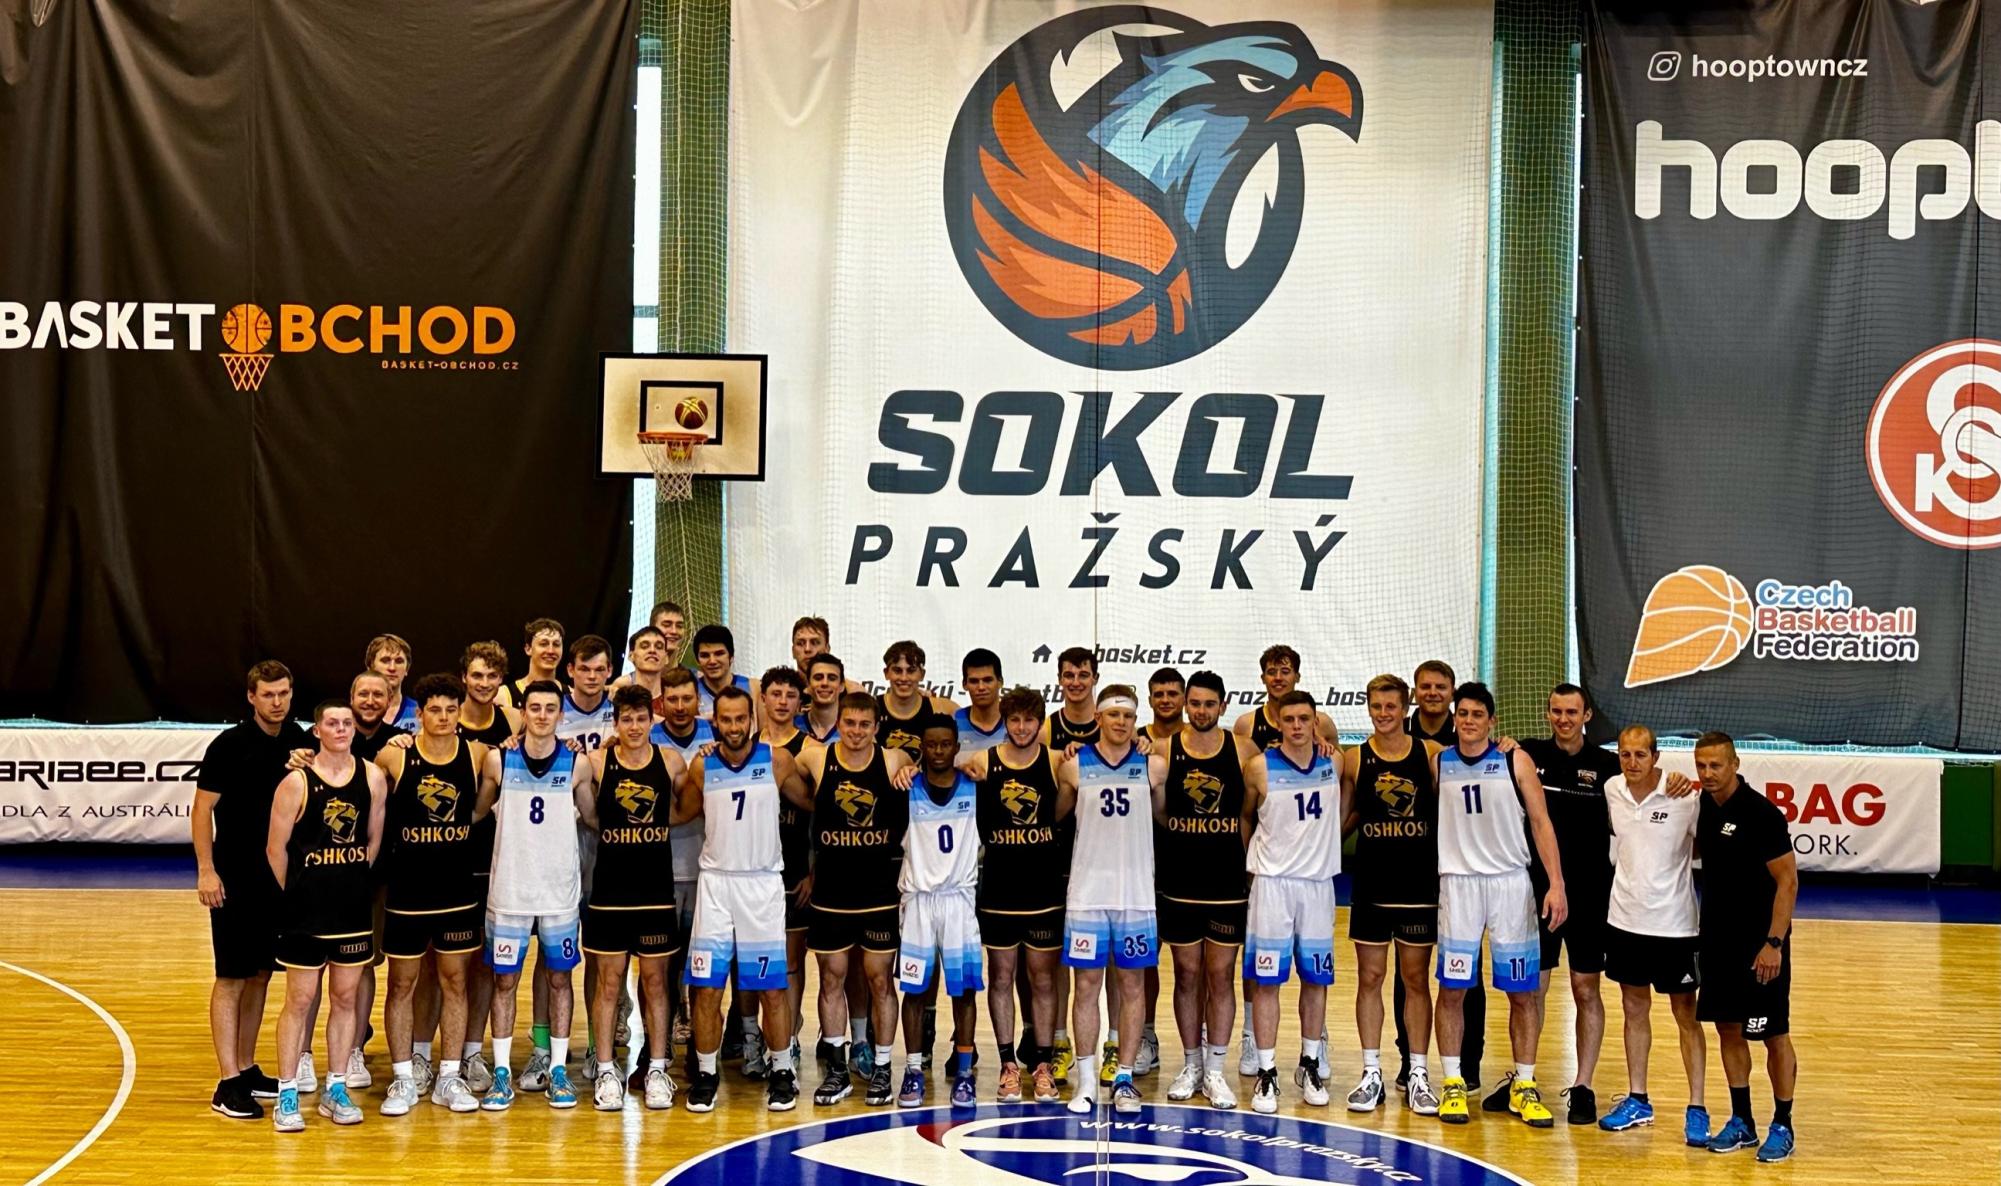 Courtesy of UWO Athletics -- The UWO mens basketball team poses with Czech basketball team Sokol Prazsky after an exhibition game between the two teams over the summer in Prague.